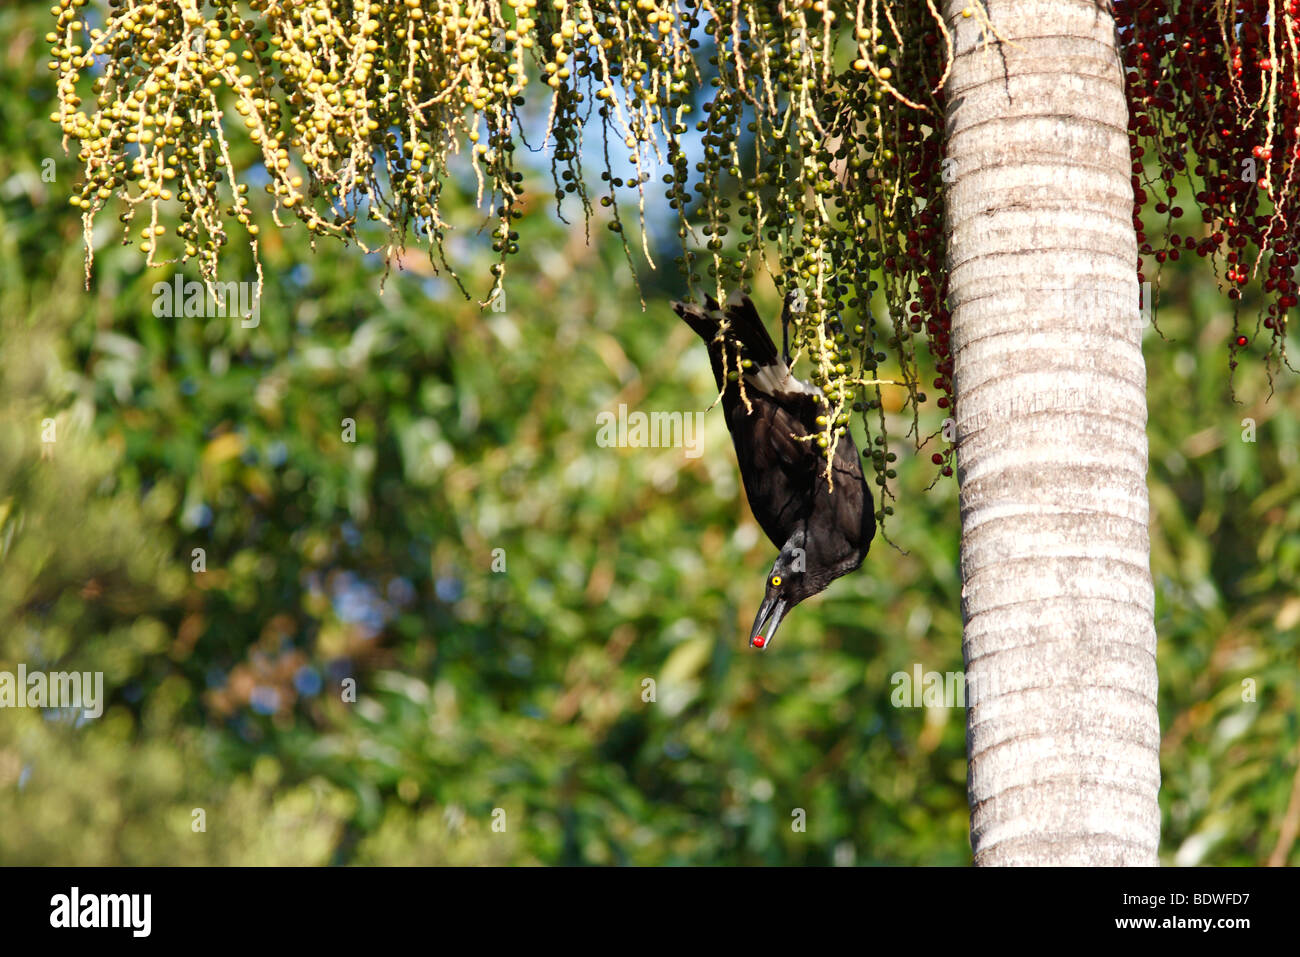 Pied Currawong, Strepera graculina, eating the fruit of the Alexandra Palm. The bird has a berry in its beak Stock Photo